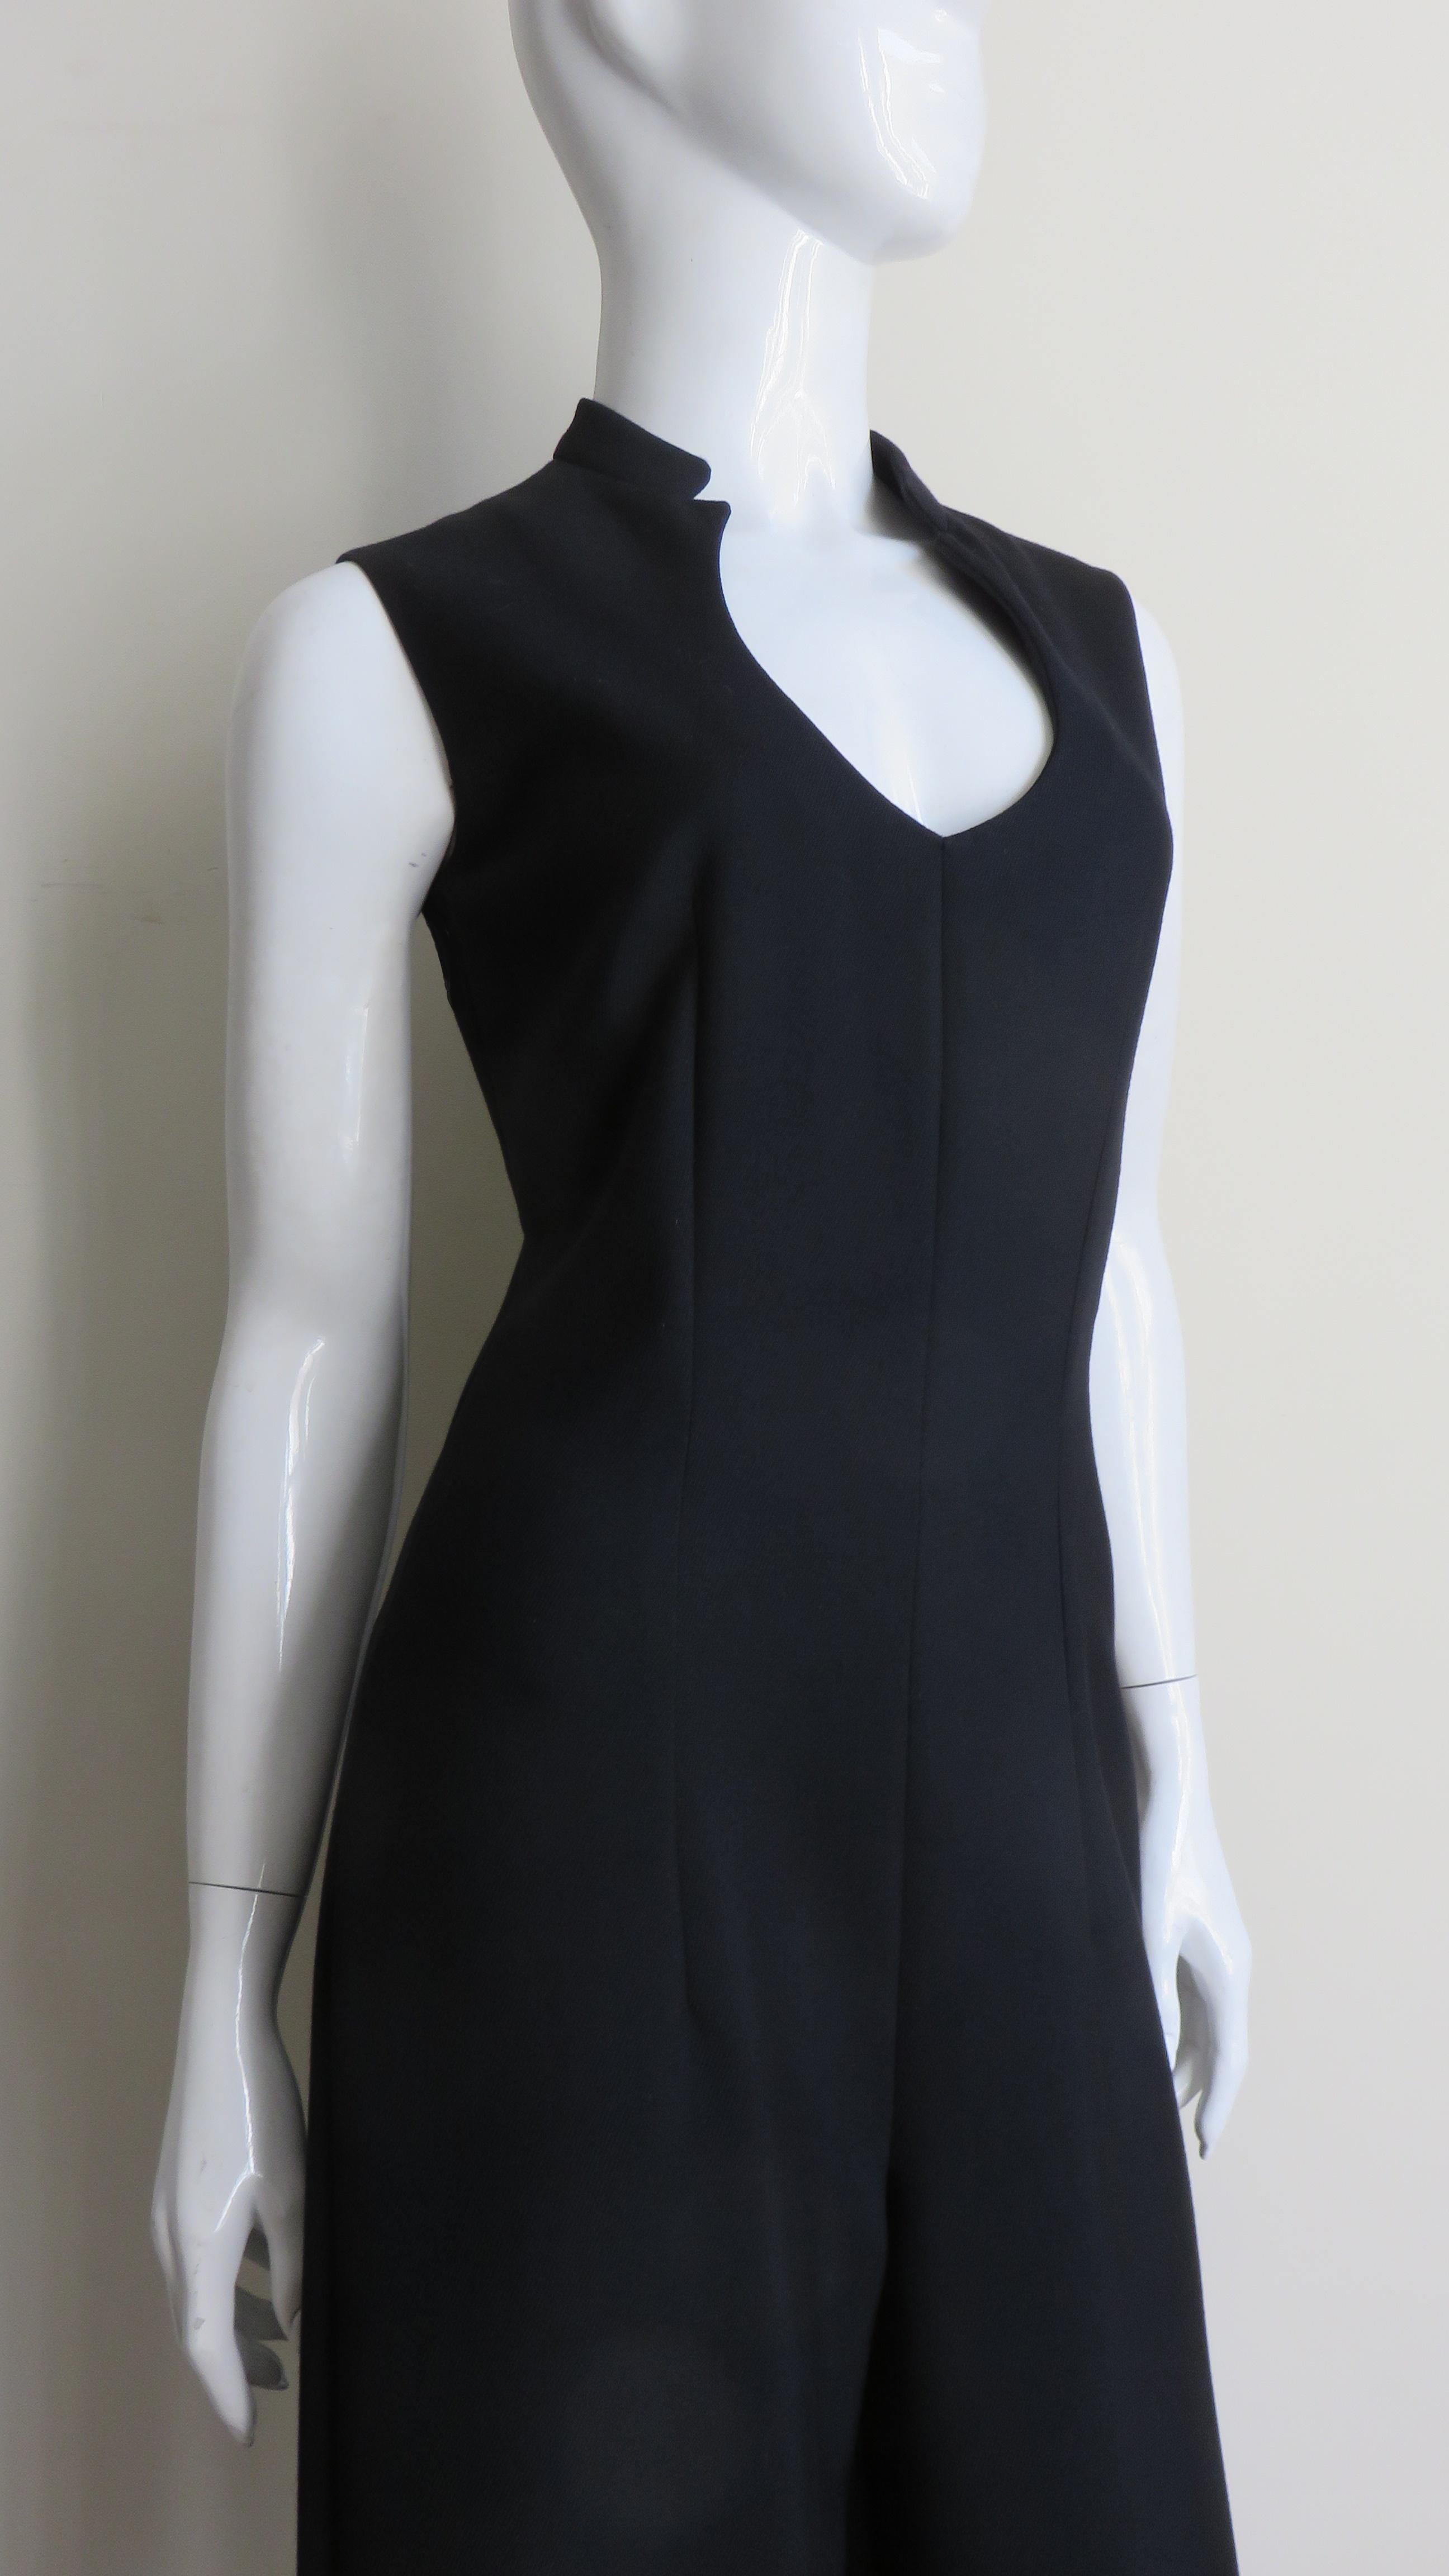 Yves St Laurent Jumpsuit A/W 2010 In Good Condition For Sale In Water Mill, NY